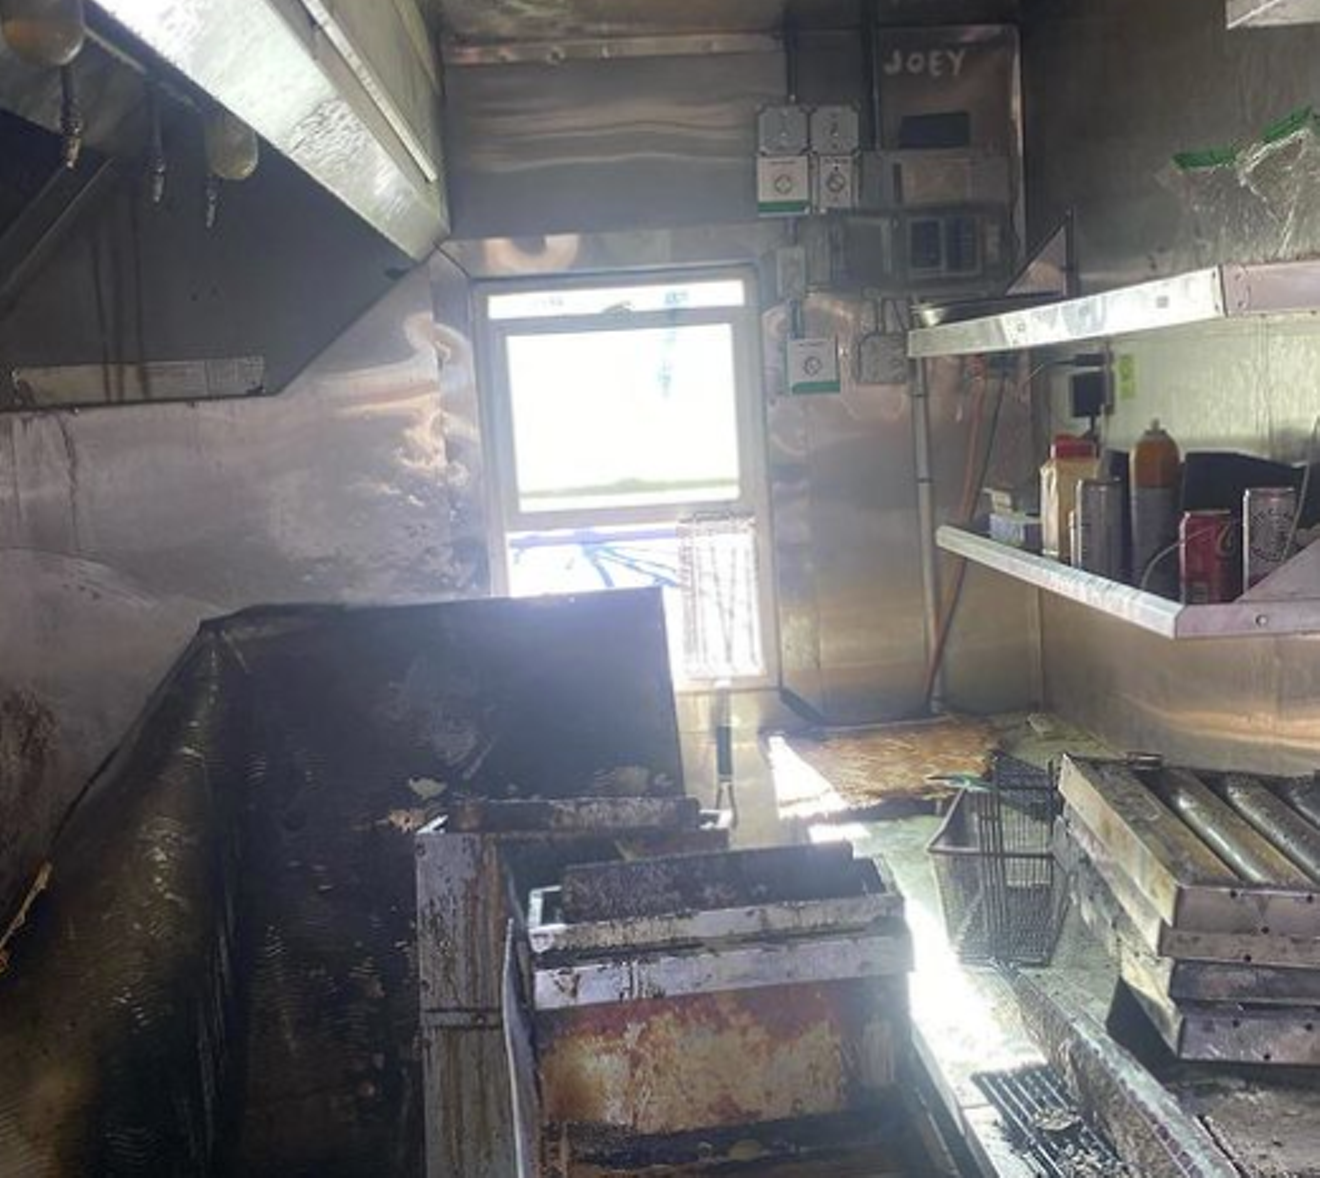 A kitchen fire on December 20 will keep kind of wings closed until at least March.